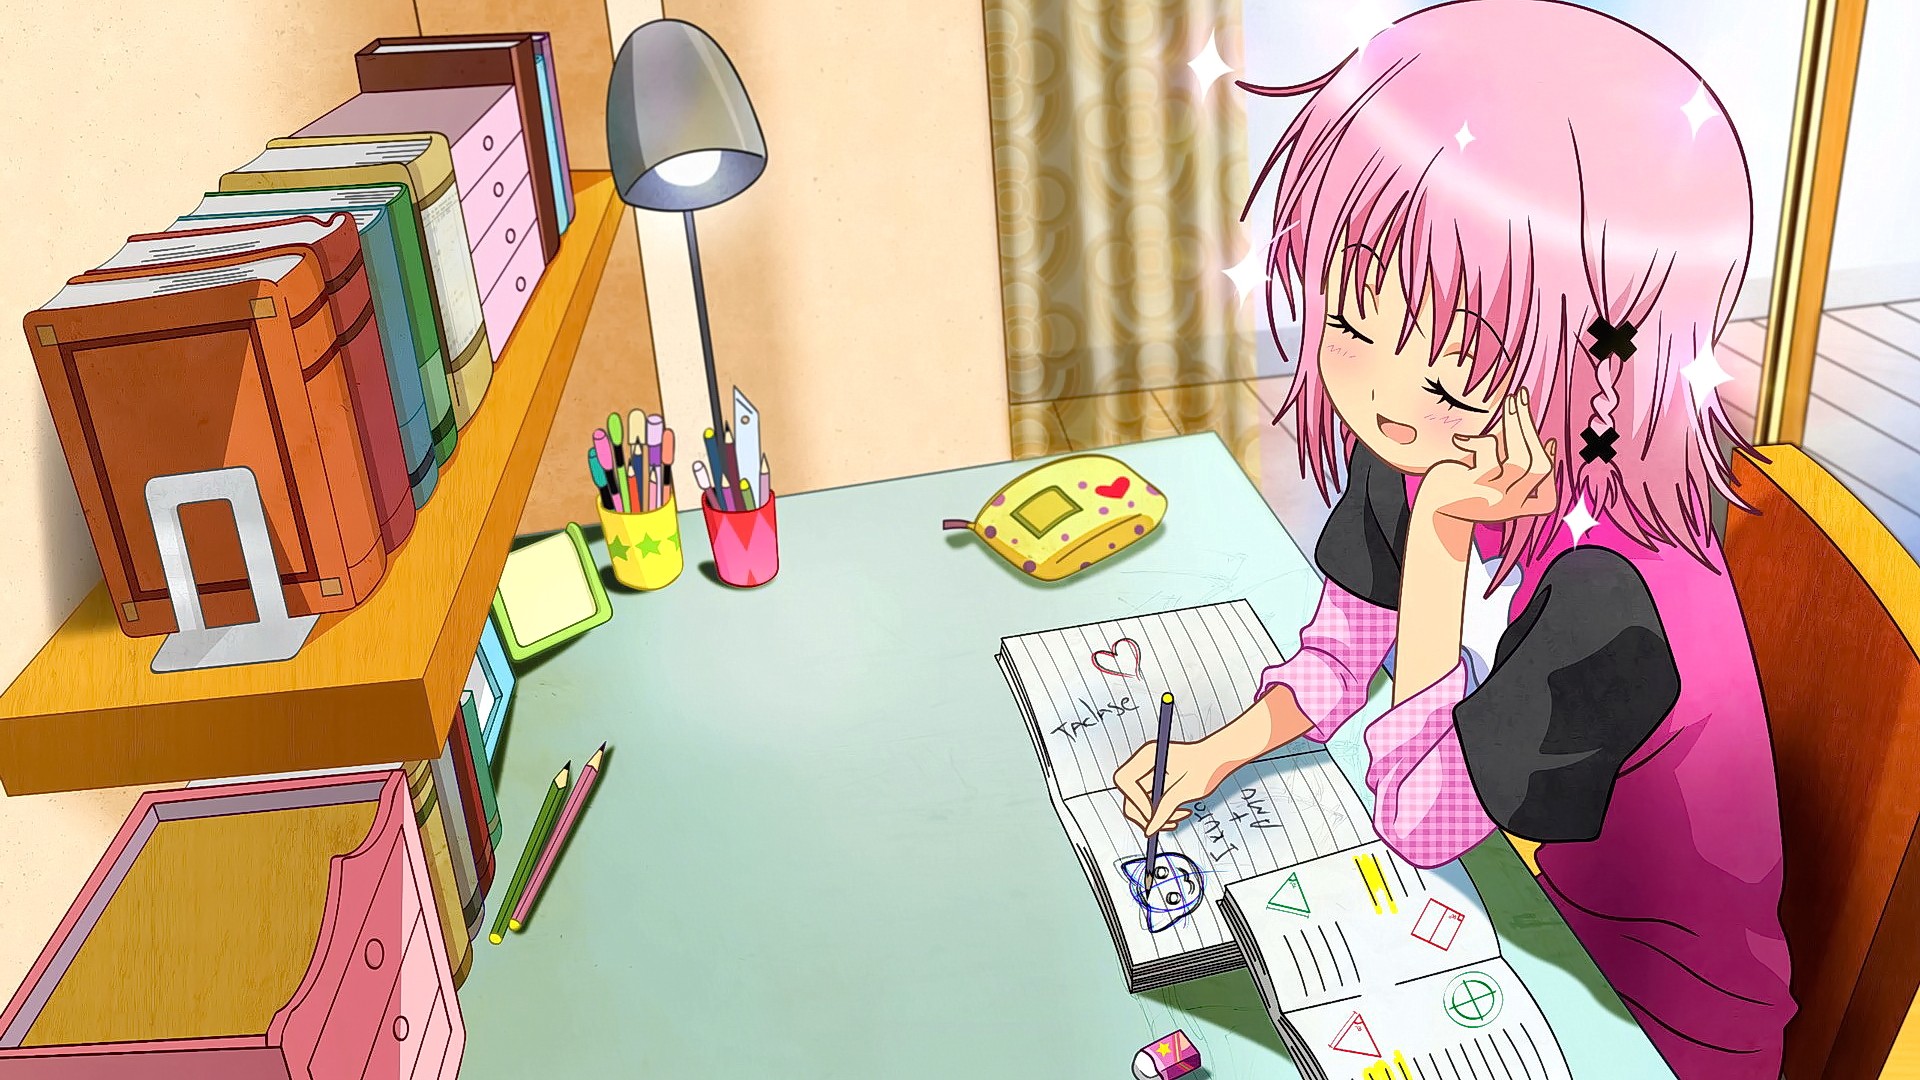 Anime 1920x1080 anime anime girls pink hair closed eyes smiling open mouth Shugo Chara indoors pencils desk lamp